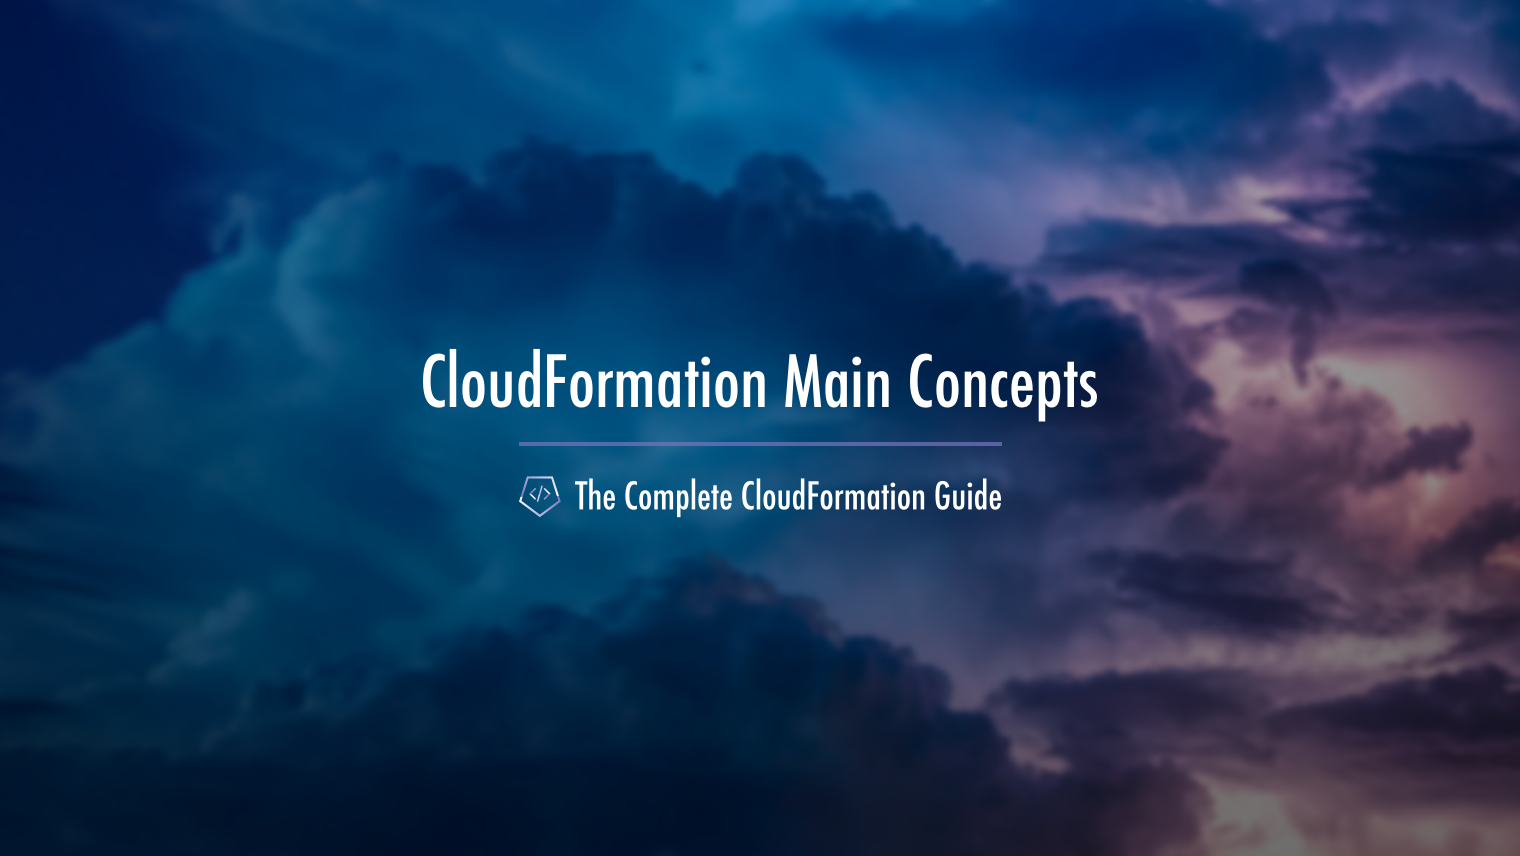 The Complete CloudFormation Guide The Main Concepts of CloudFormation